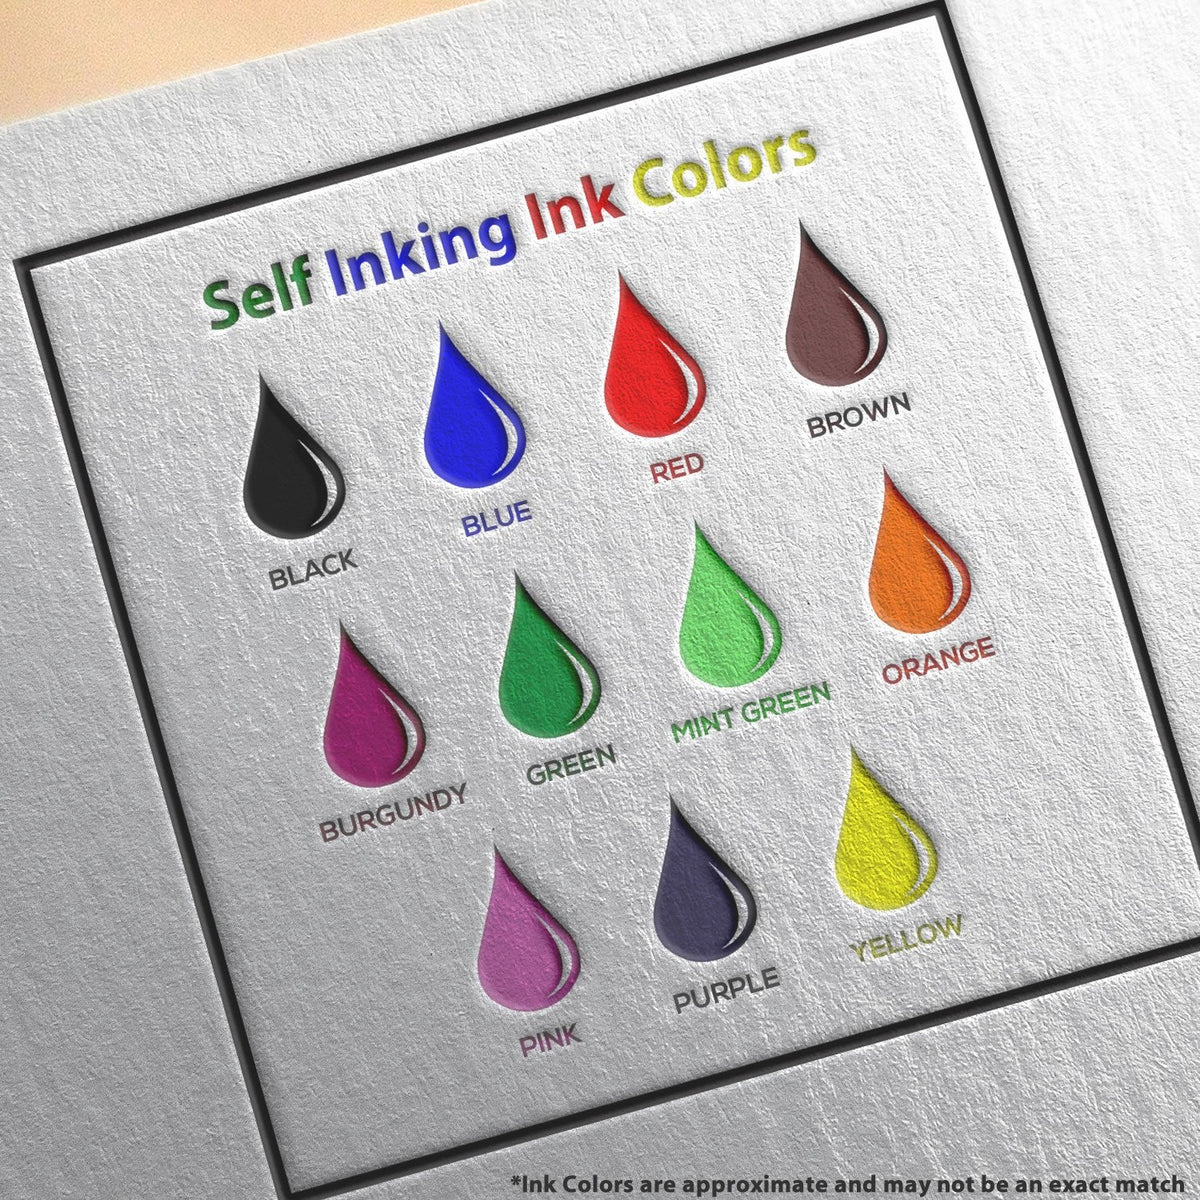 Self-Inking Posted with Date Box Stamp Ink Color Options